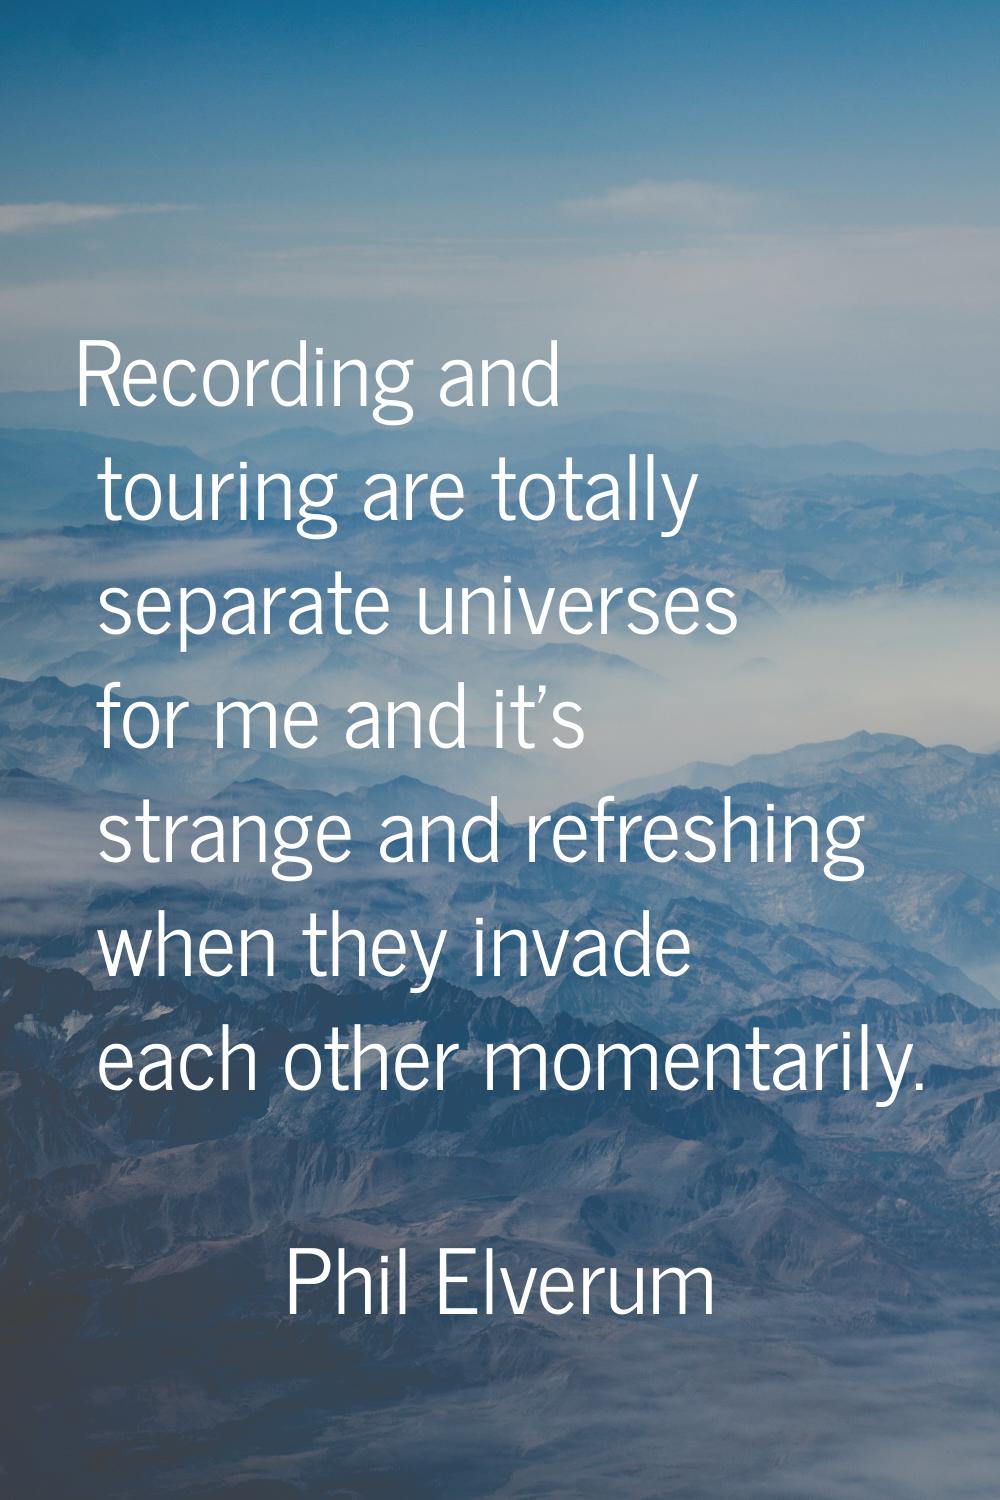 Recording and touring are totally separate universes for me and it's strange and refreshing when th